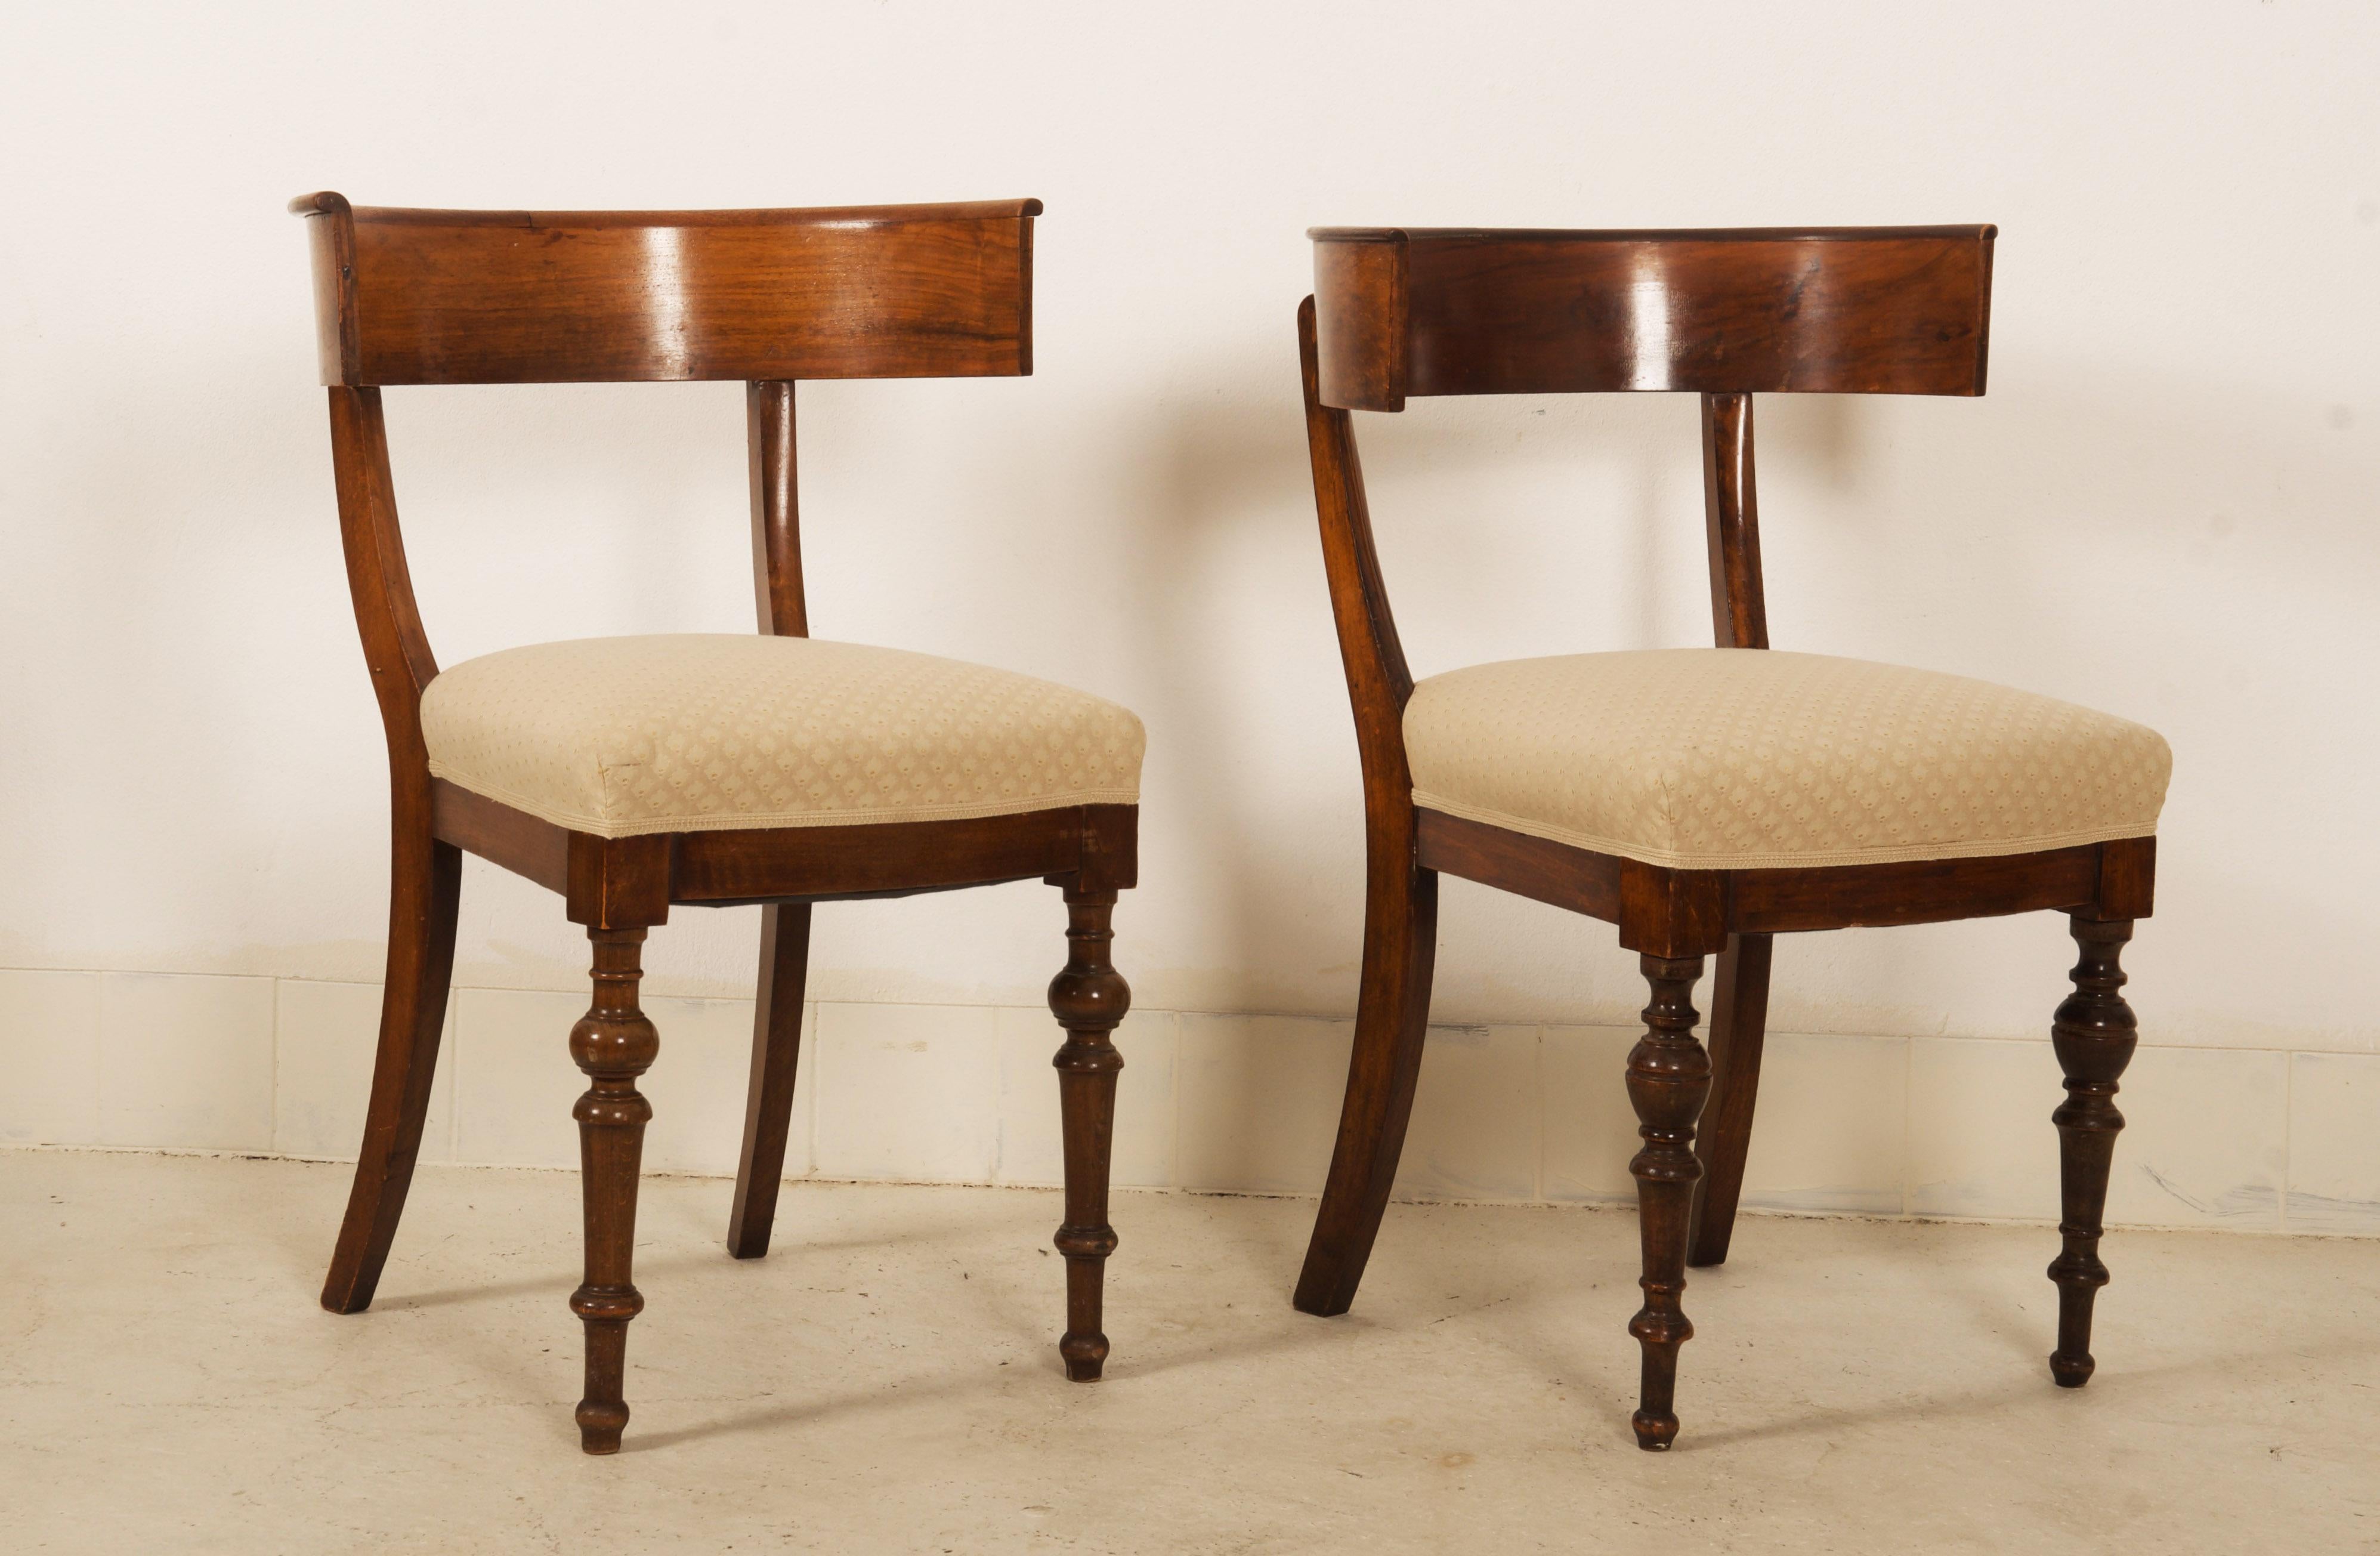 A pair of late 19th century walnut Klismos chairs with turned front legs (each different), splayed back legs and curved backrests. Made in England in the 1880s.